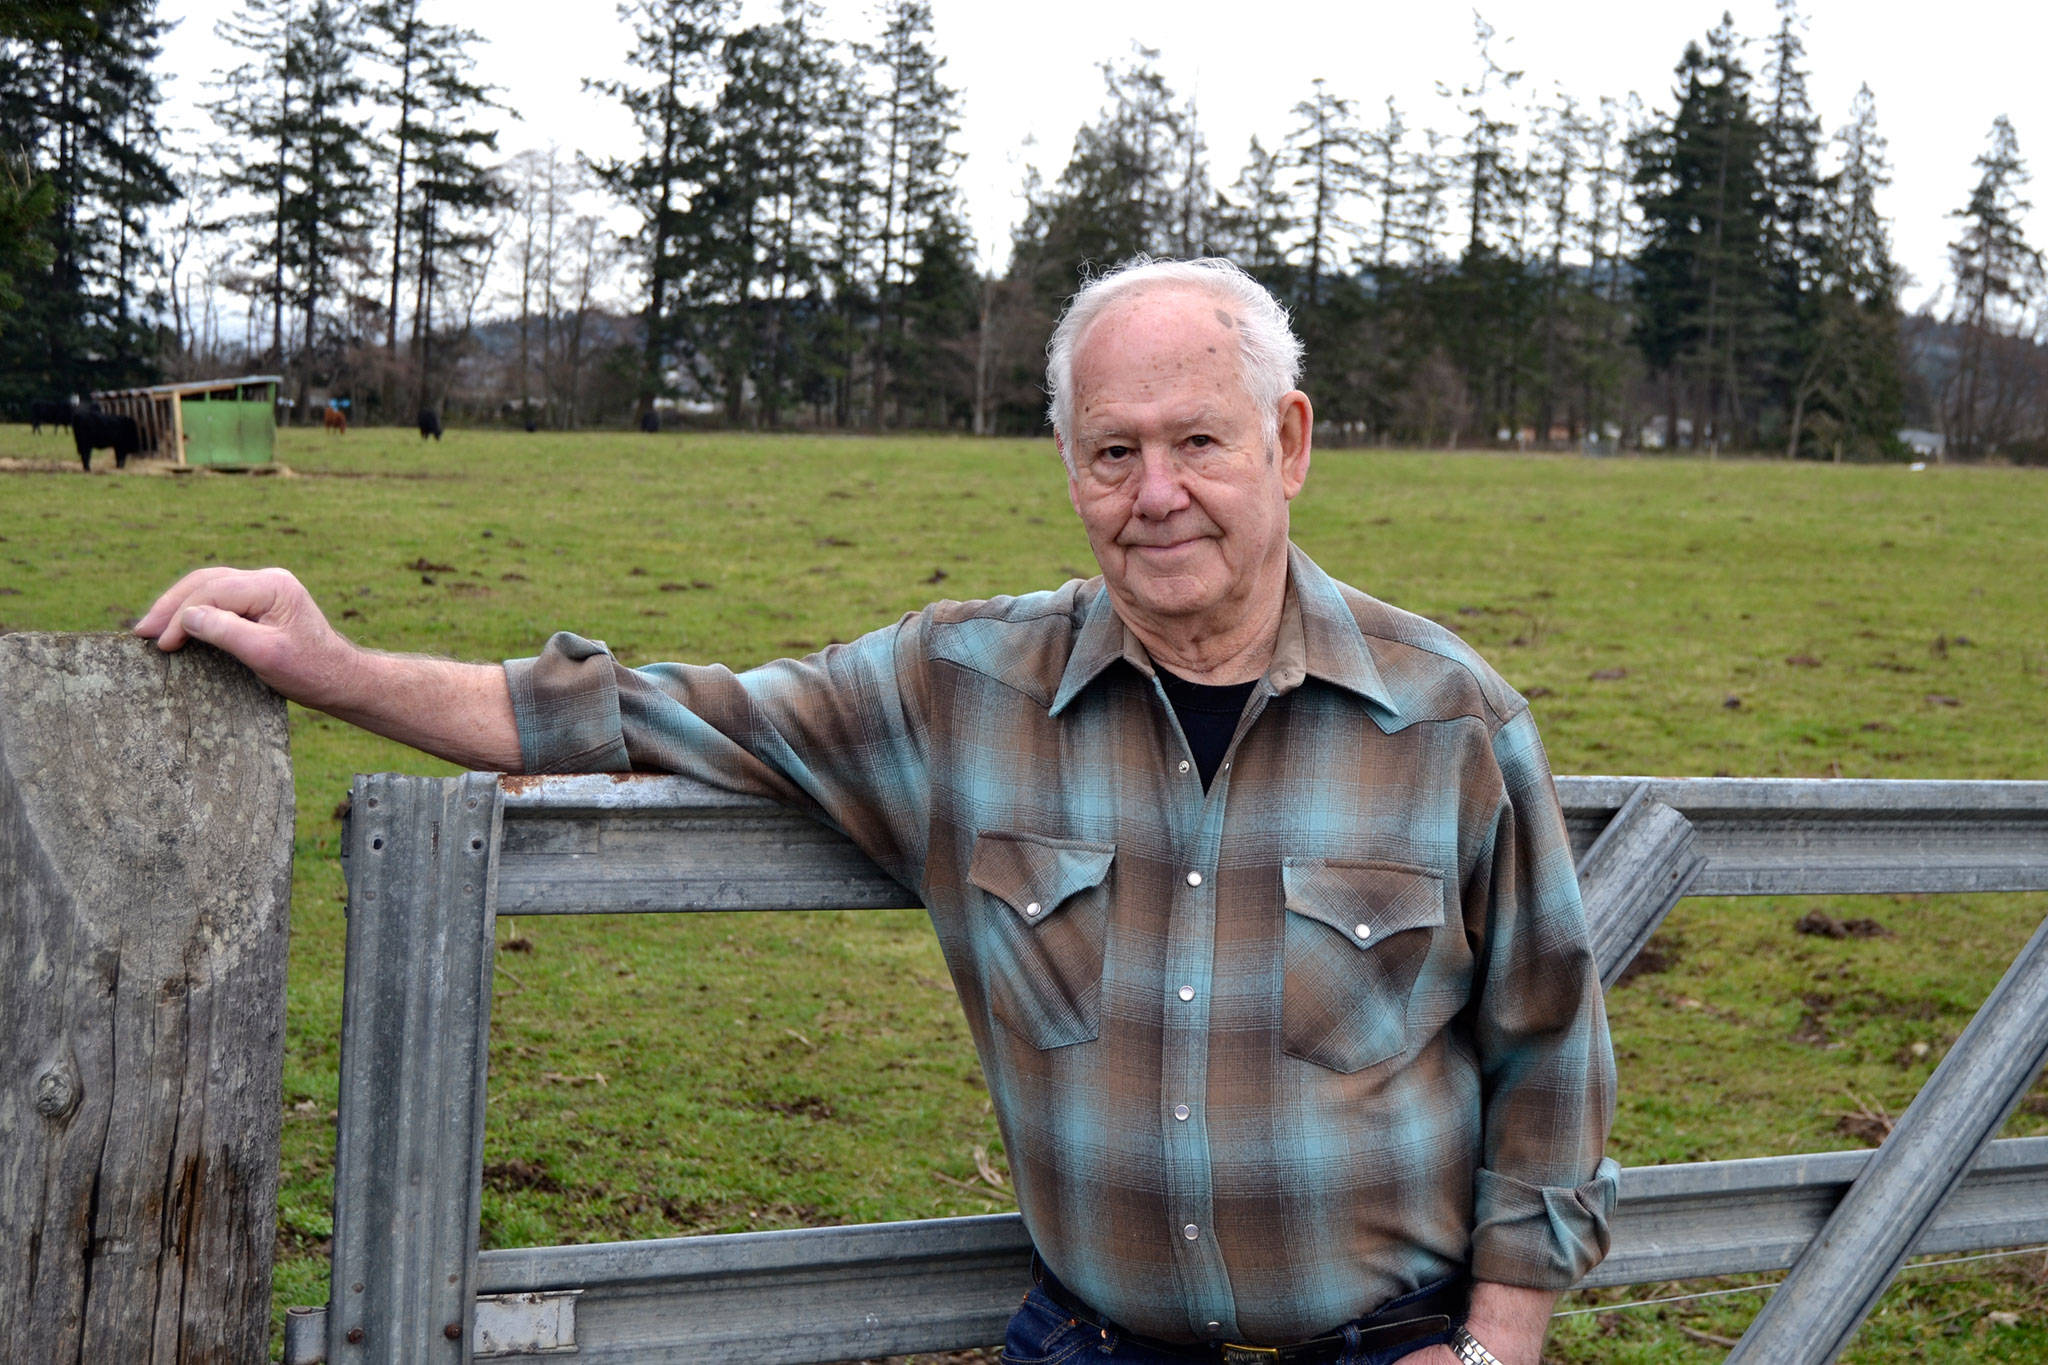 Don Ellis says he’s honored to be named a Grand Pioneer for the Sequim Irrigation Festival. He said his parents Matt and Rachel “will be looking down with a smile” when he rides in the Grand Parade on May 12. Sequim Gazette photo by Matthew Nash